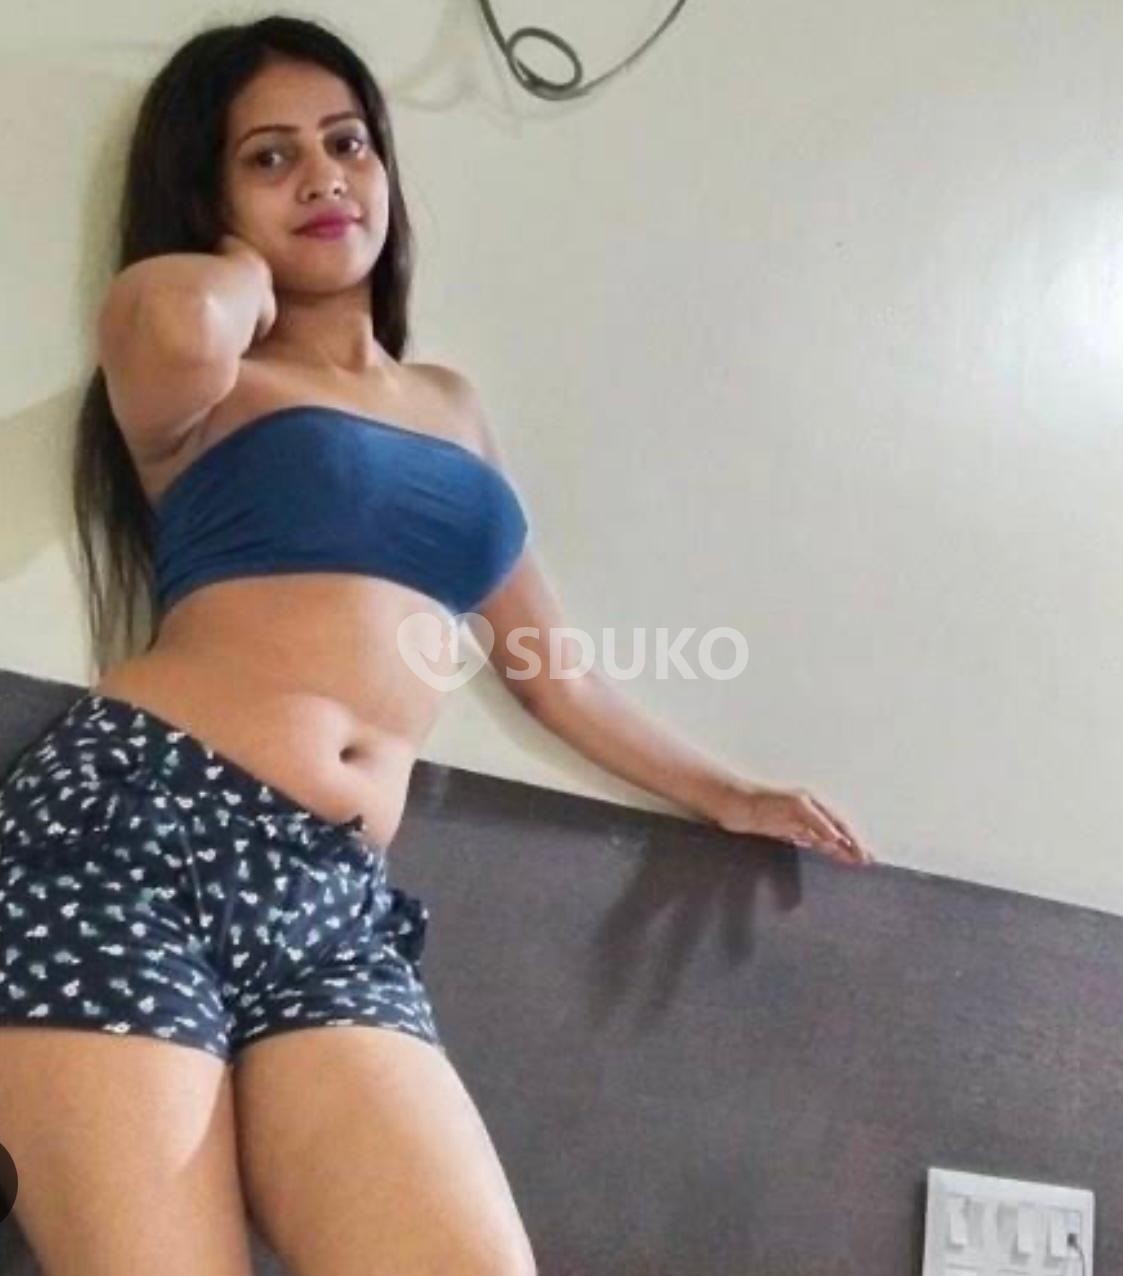 Call girl in Hyderabad any time available